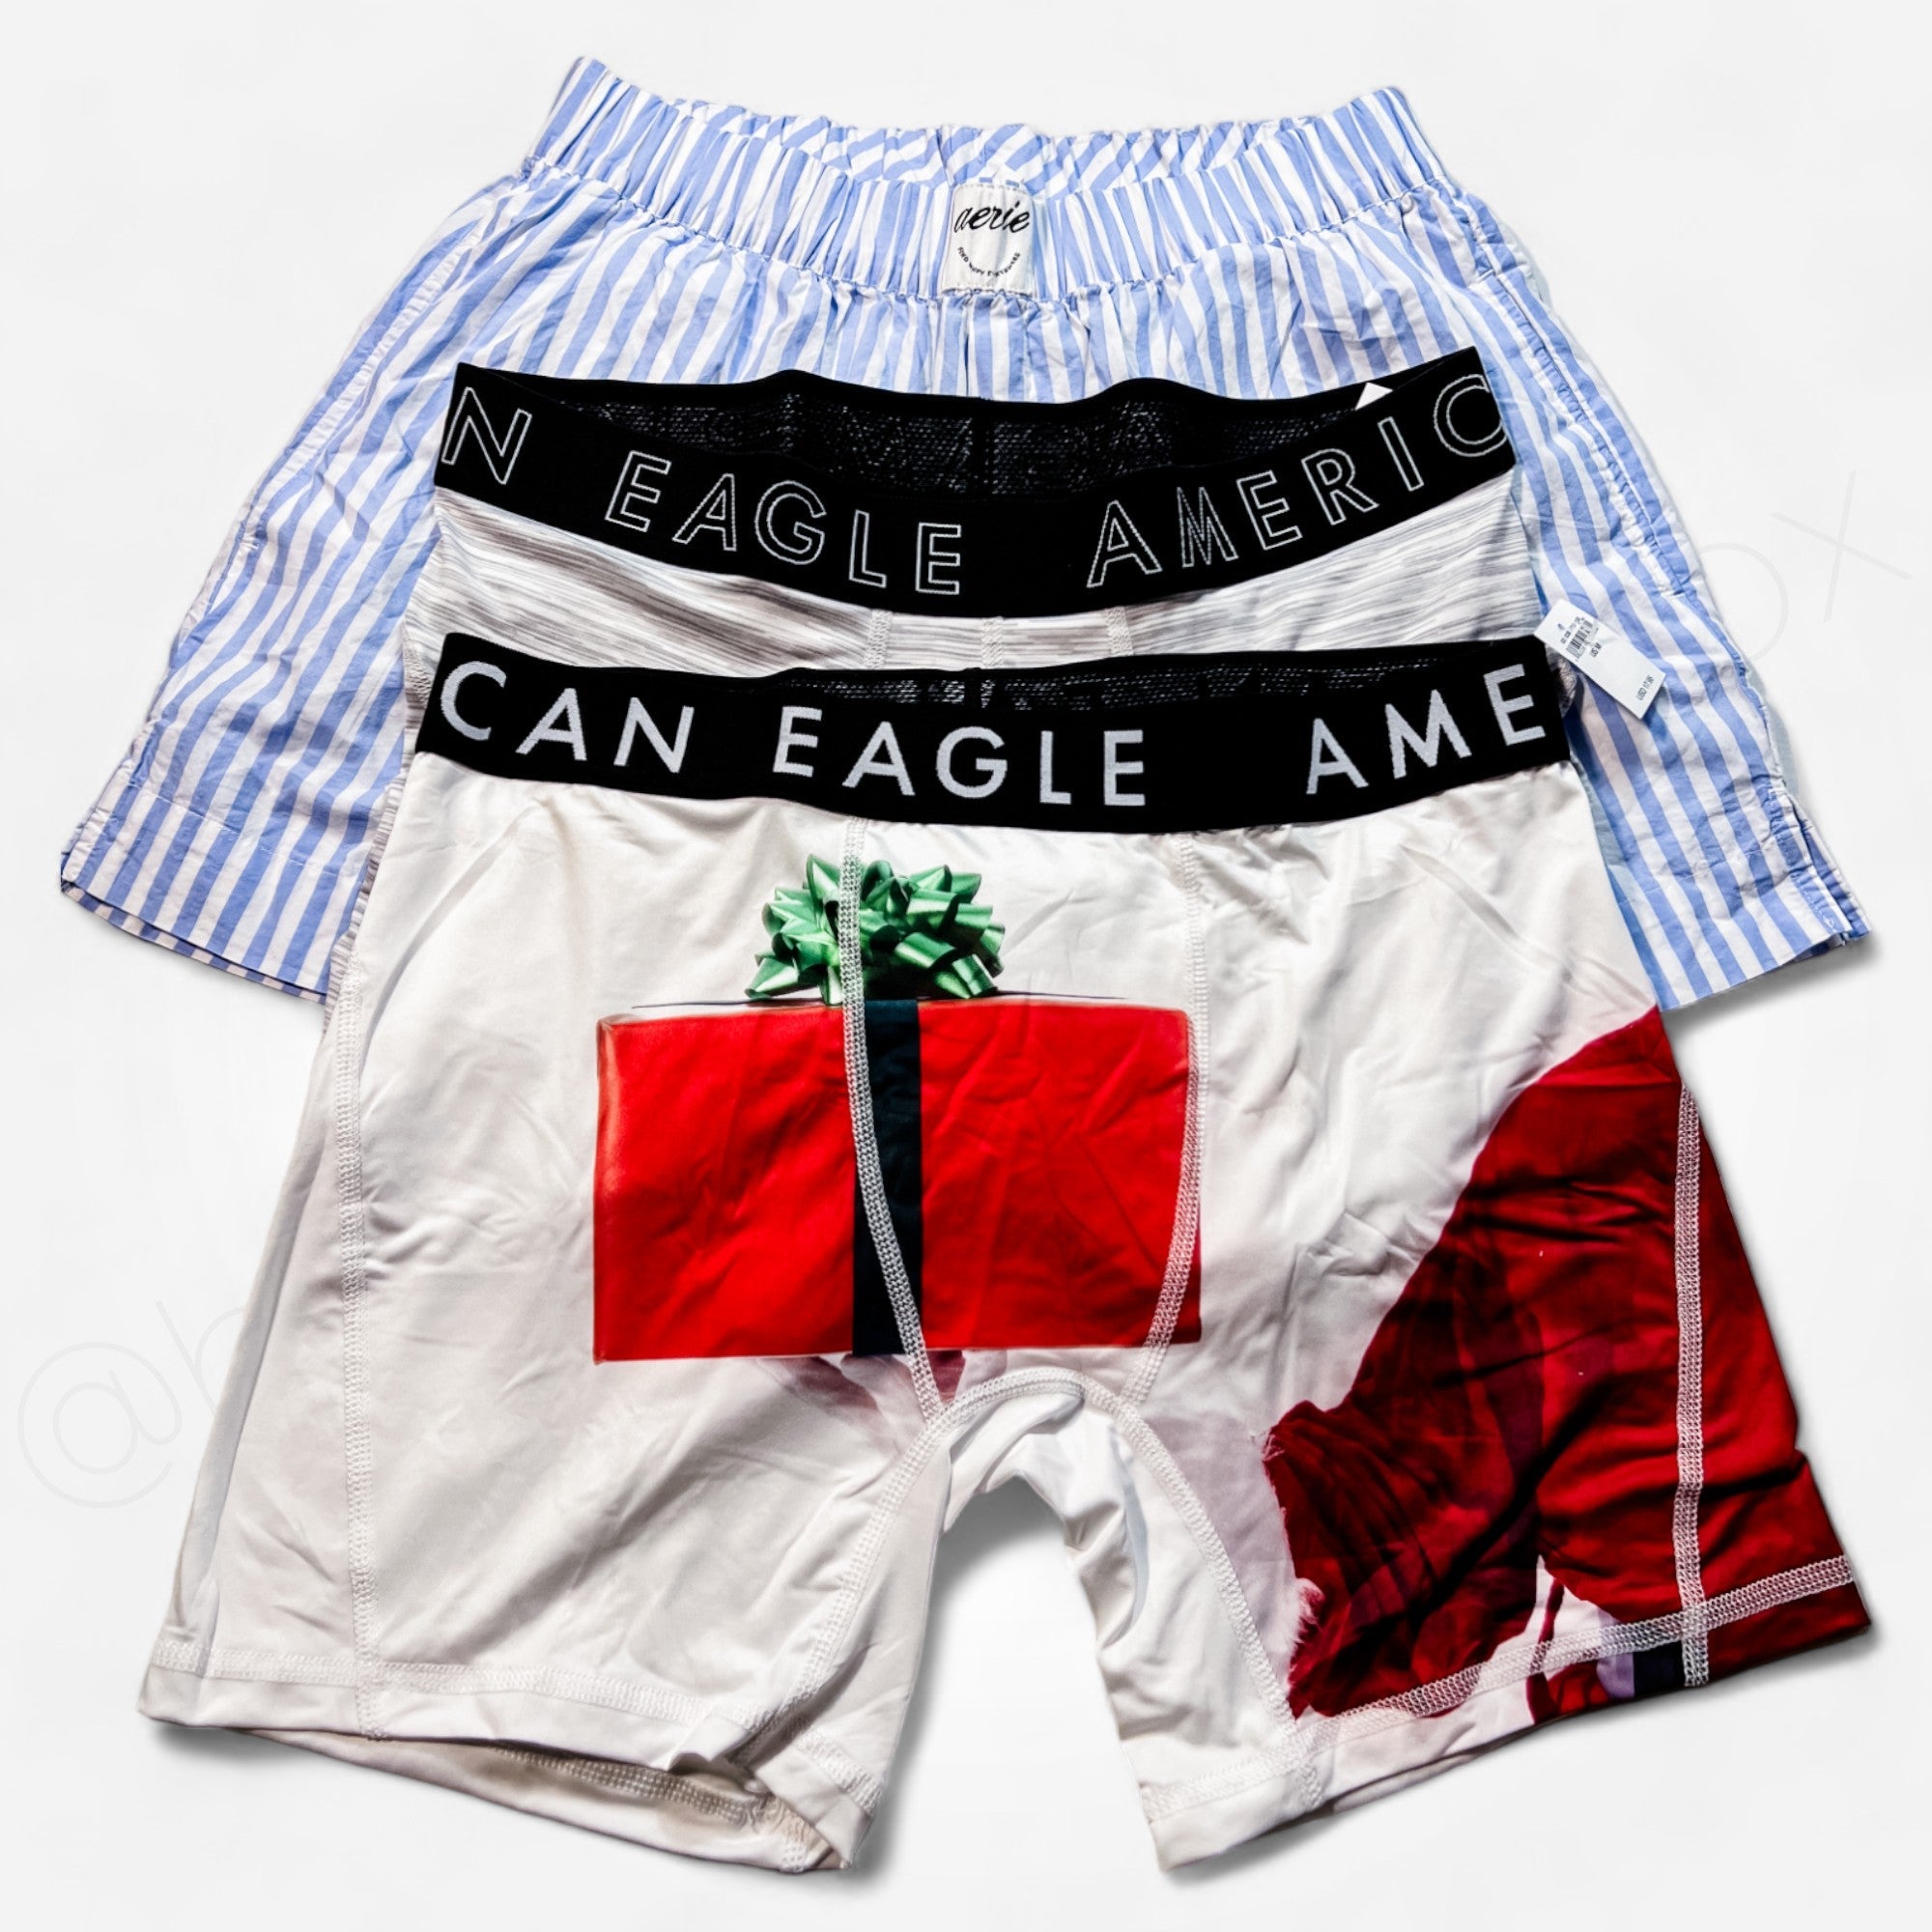 Aerie & American Eagle Men’s Boxers NWT/NWOT Wholesale 72 Units - Boutique by the Box Wholesale for Resellers